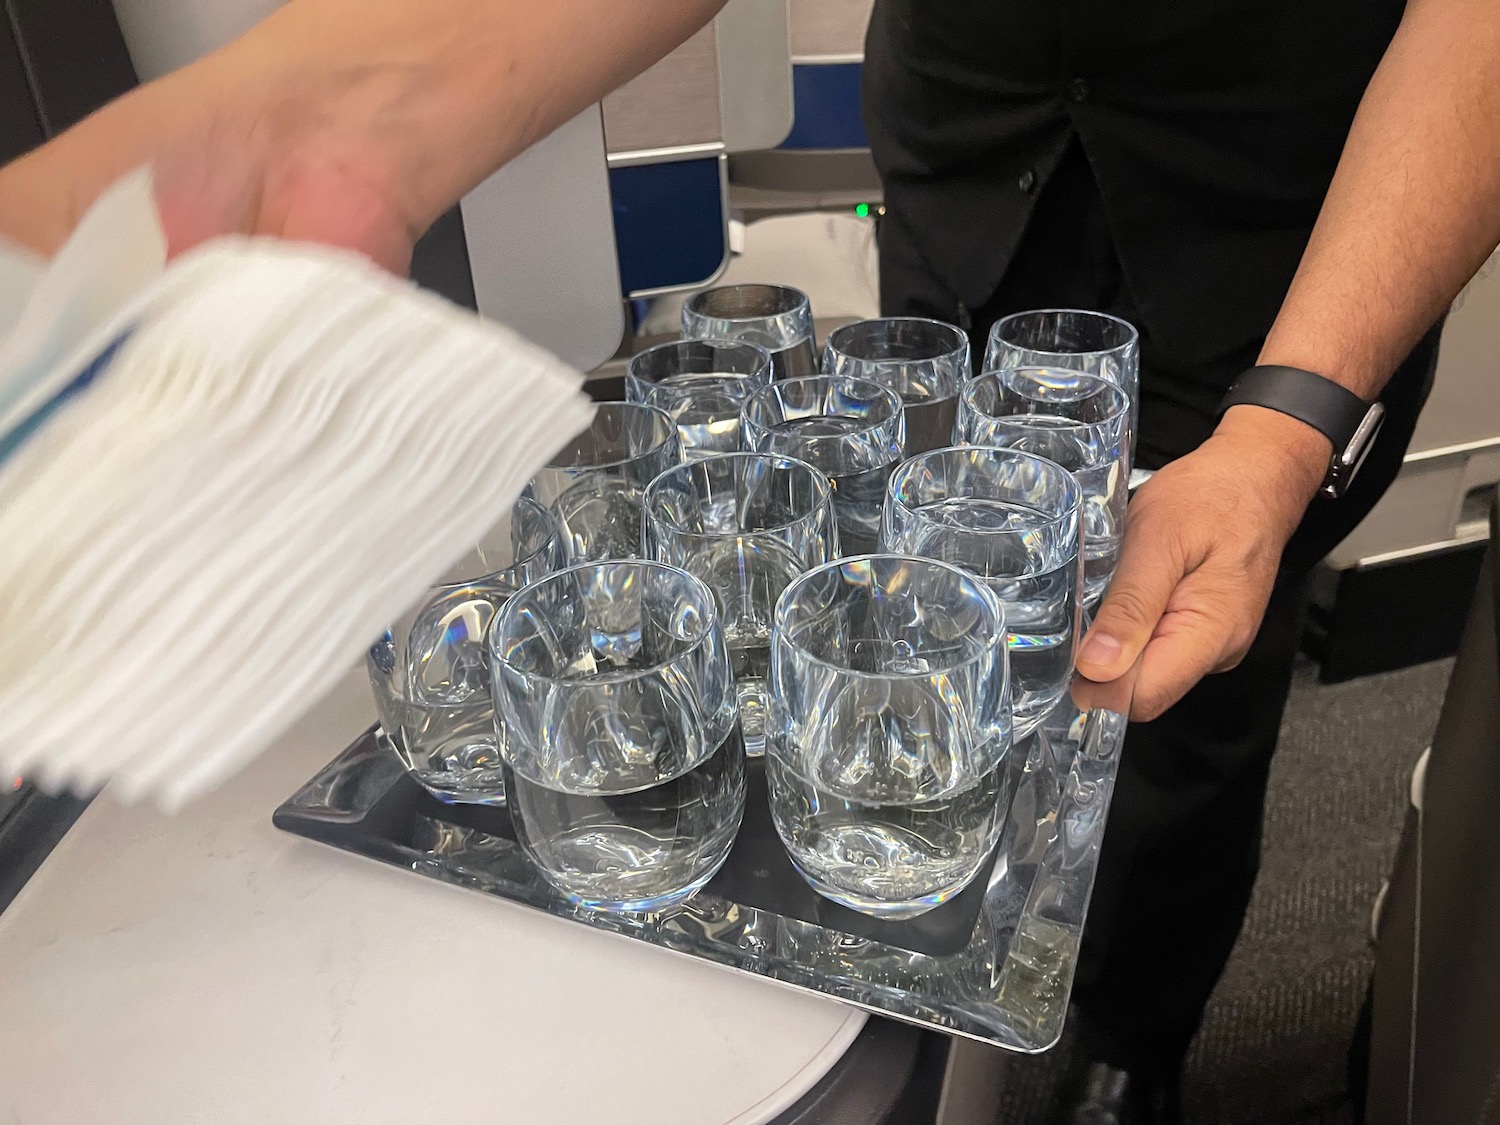 a tray of glasses and napkins